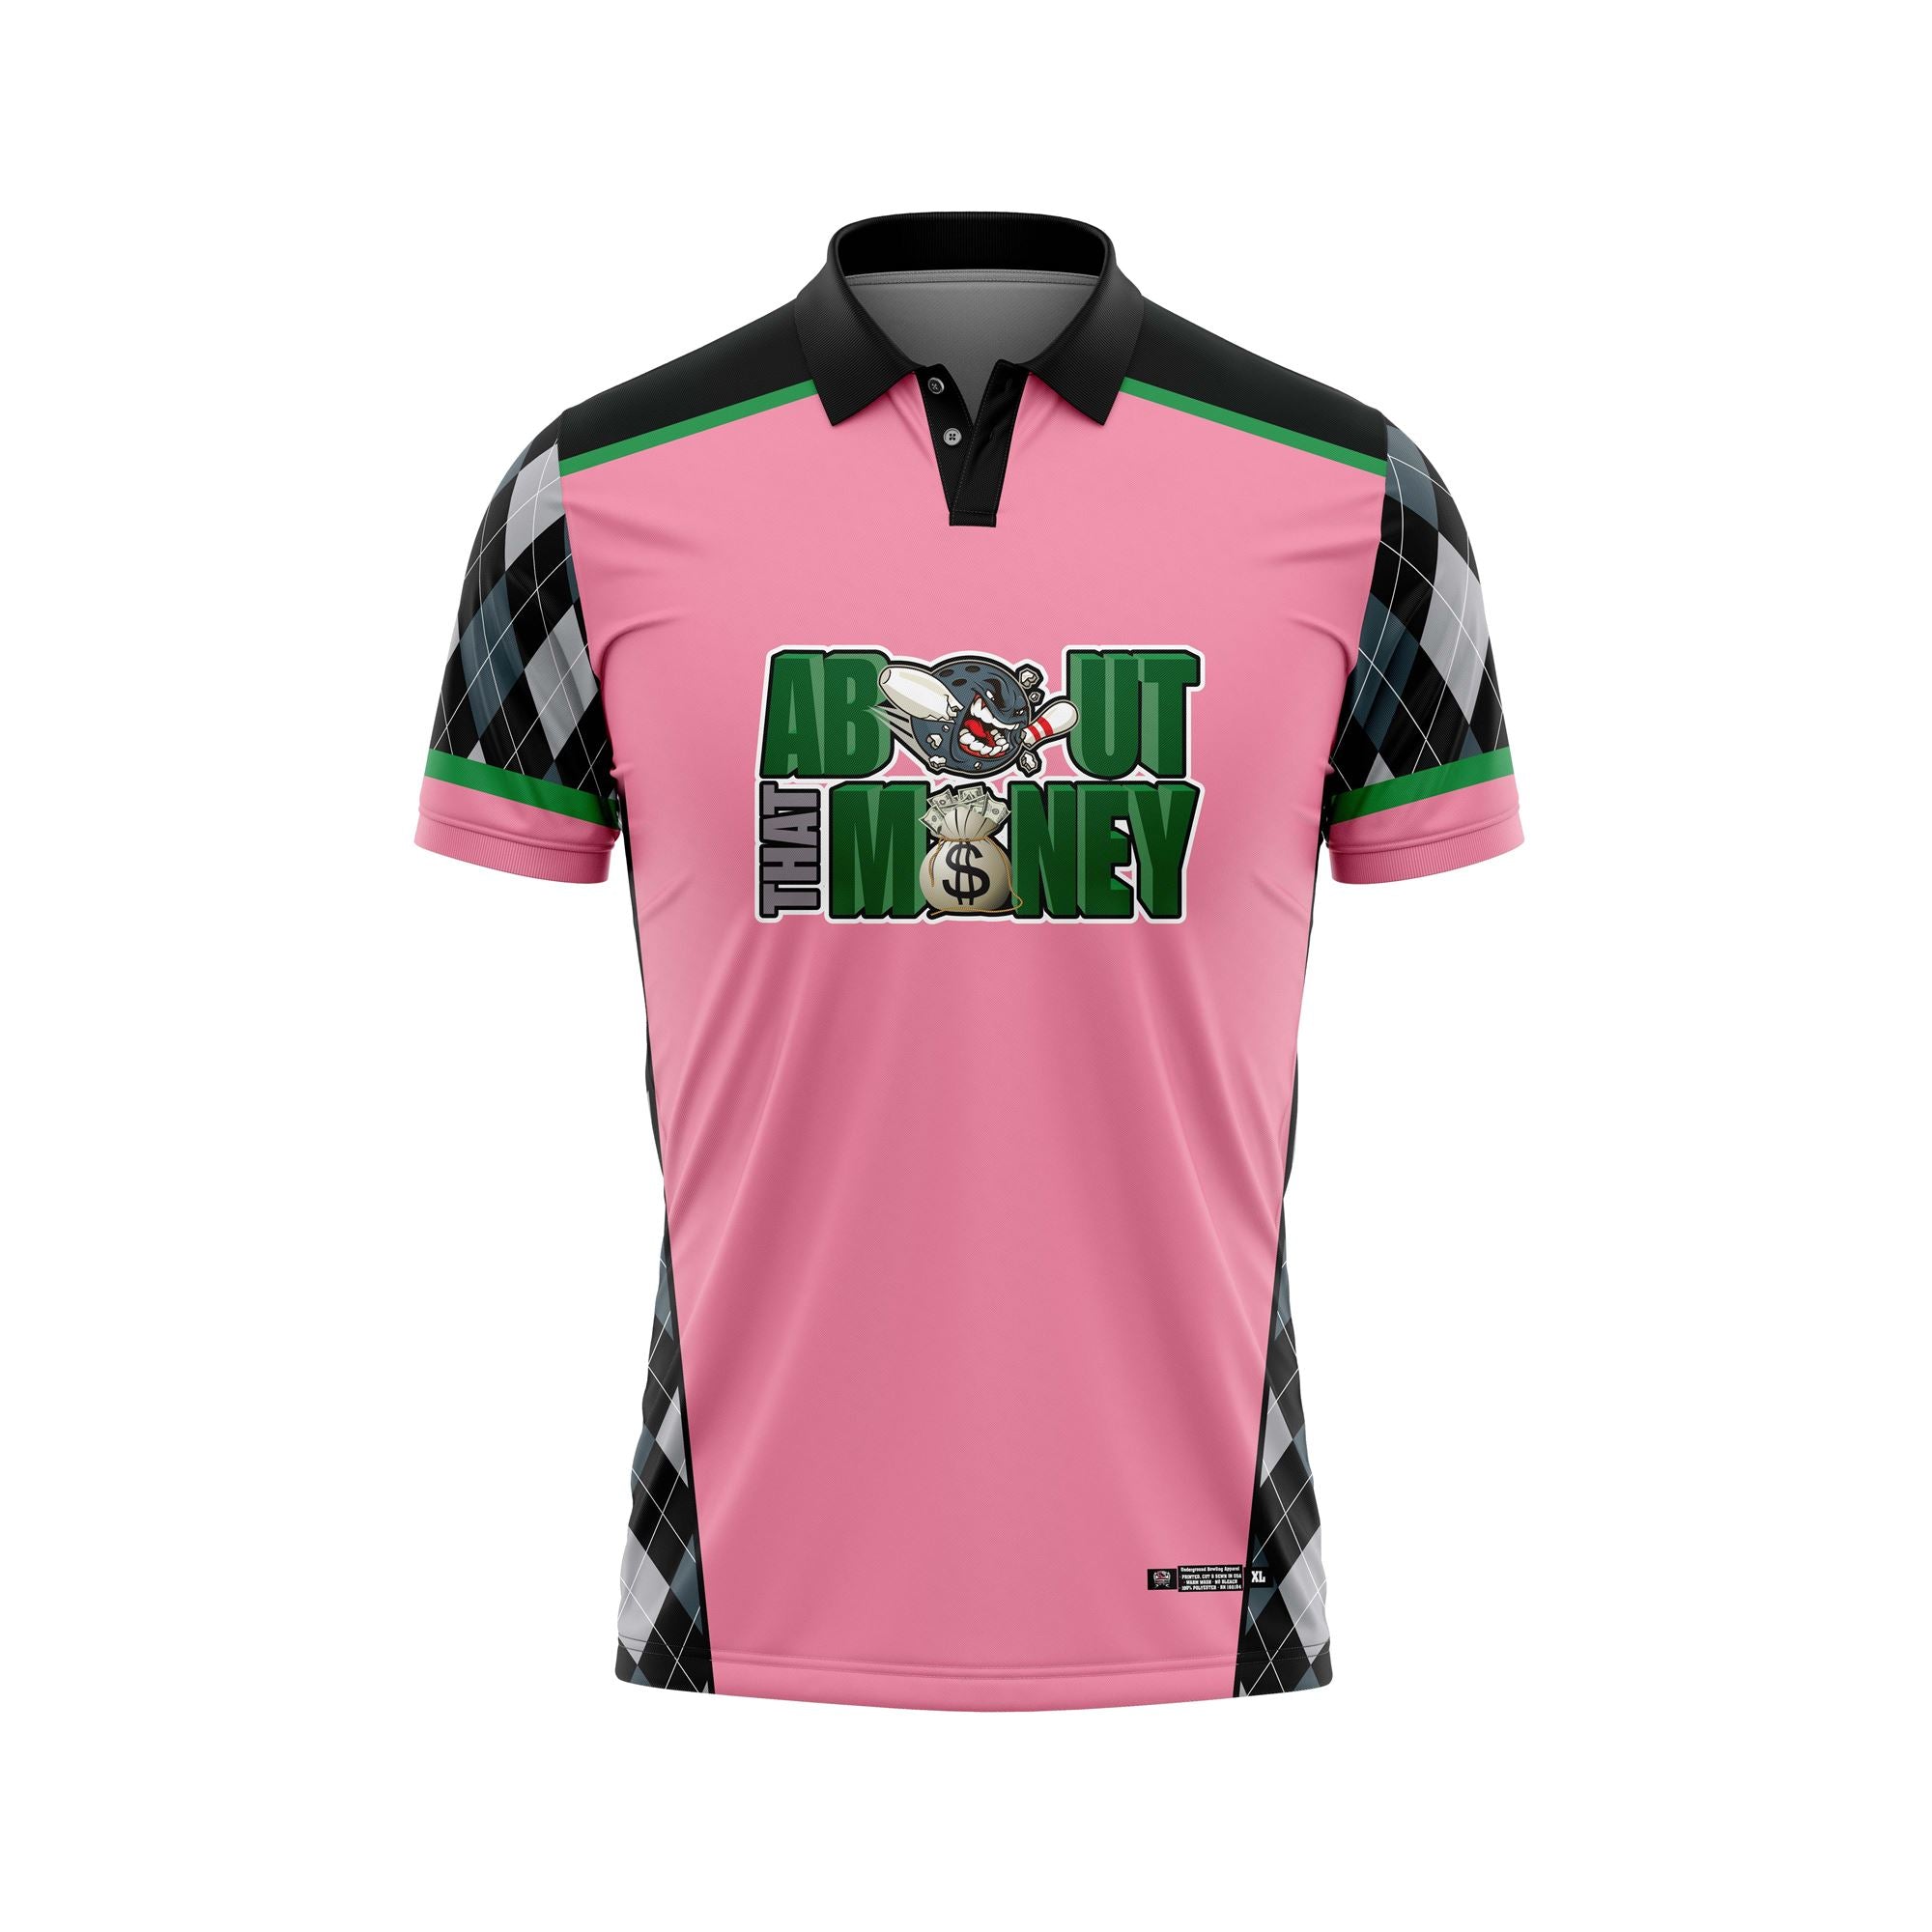 About The Money Breast Cancer Jerseys